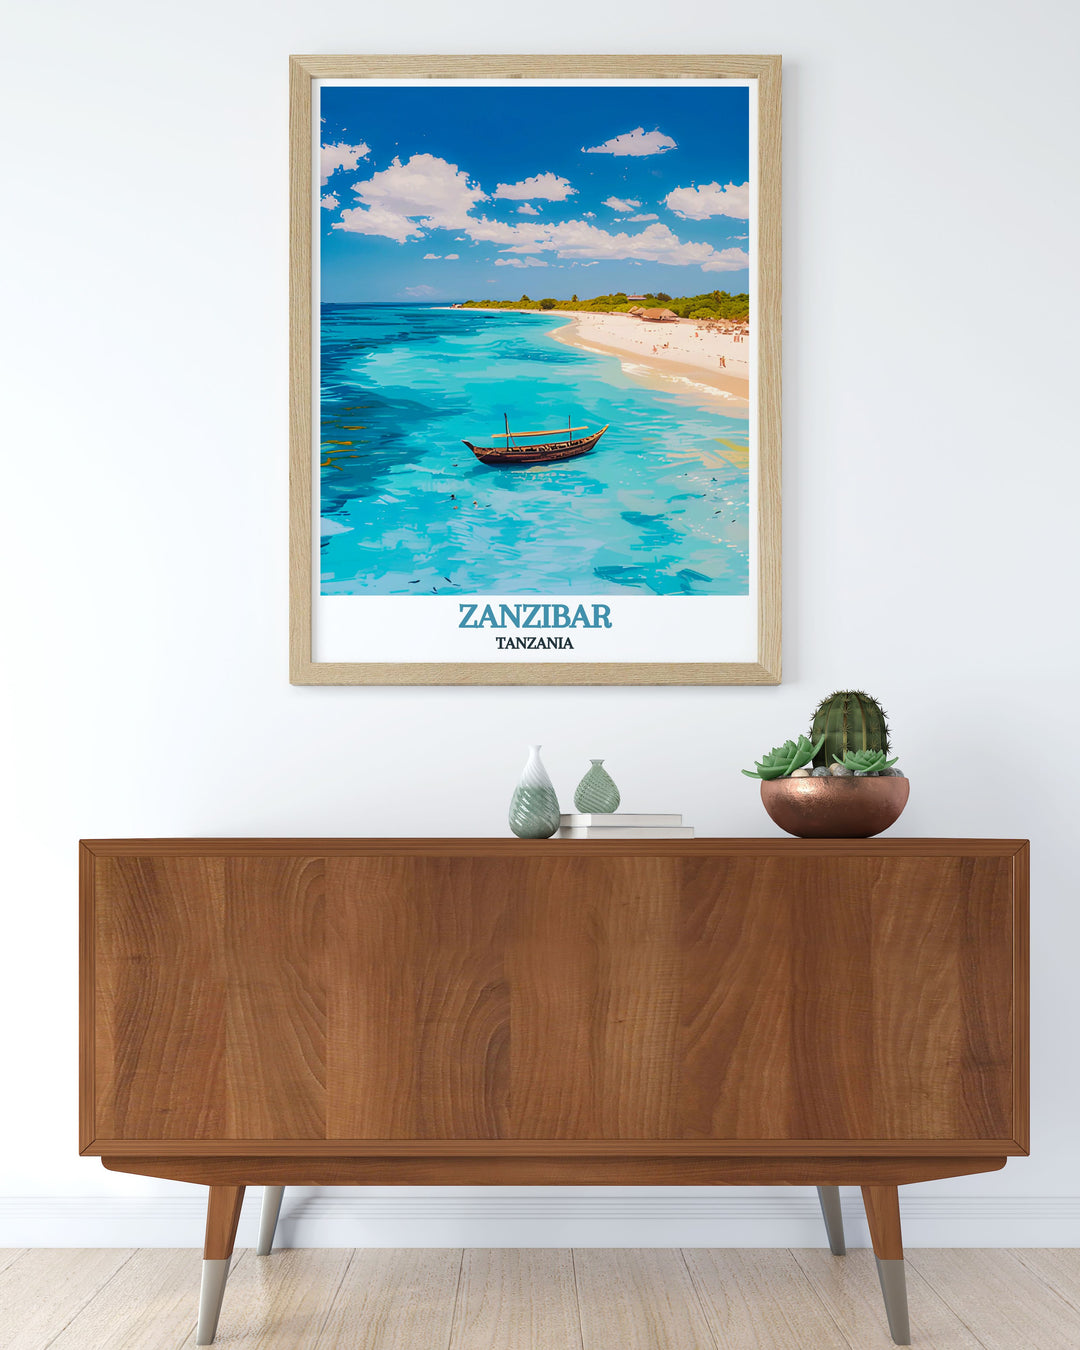 Stunning Nungwi Beach artwork capturing the enchanting views and natural beauty of Zanzibar an excellent choice for anyone who loves travel and wants to bring a piece of paradise into their living space with beautifully crafted prints.